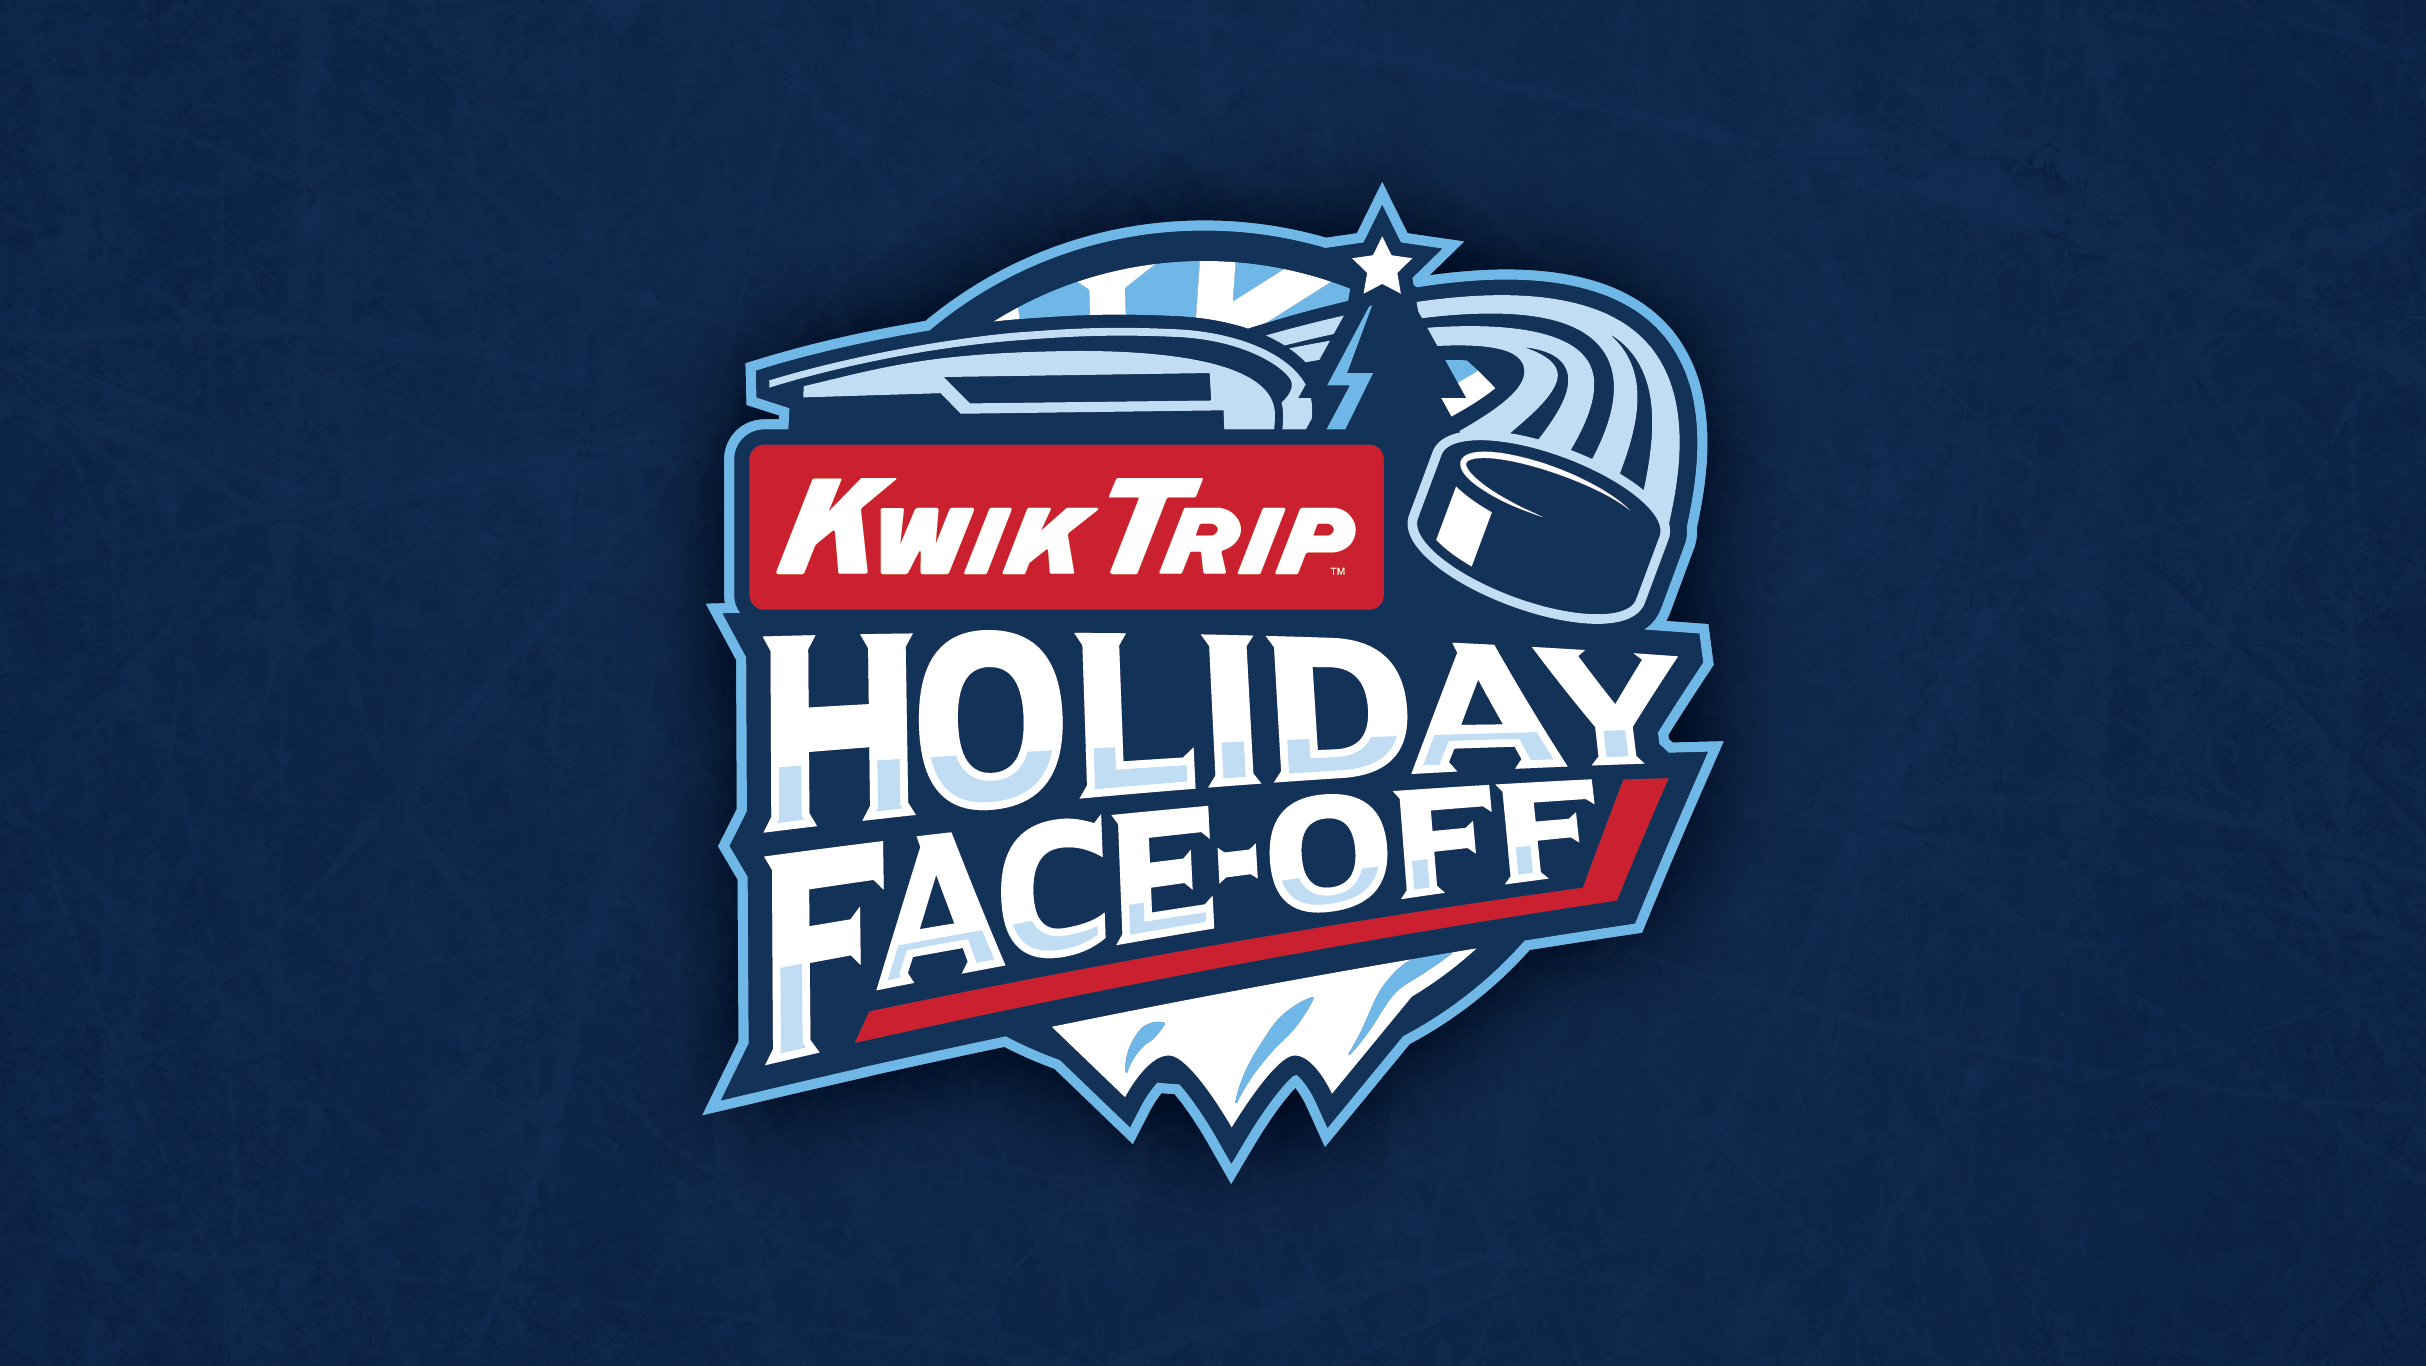 Kwik Trip Holiday Face-Off 2 Day Package ? Save Up to $20